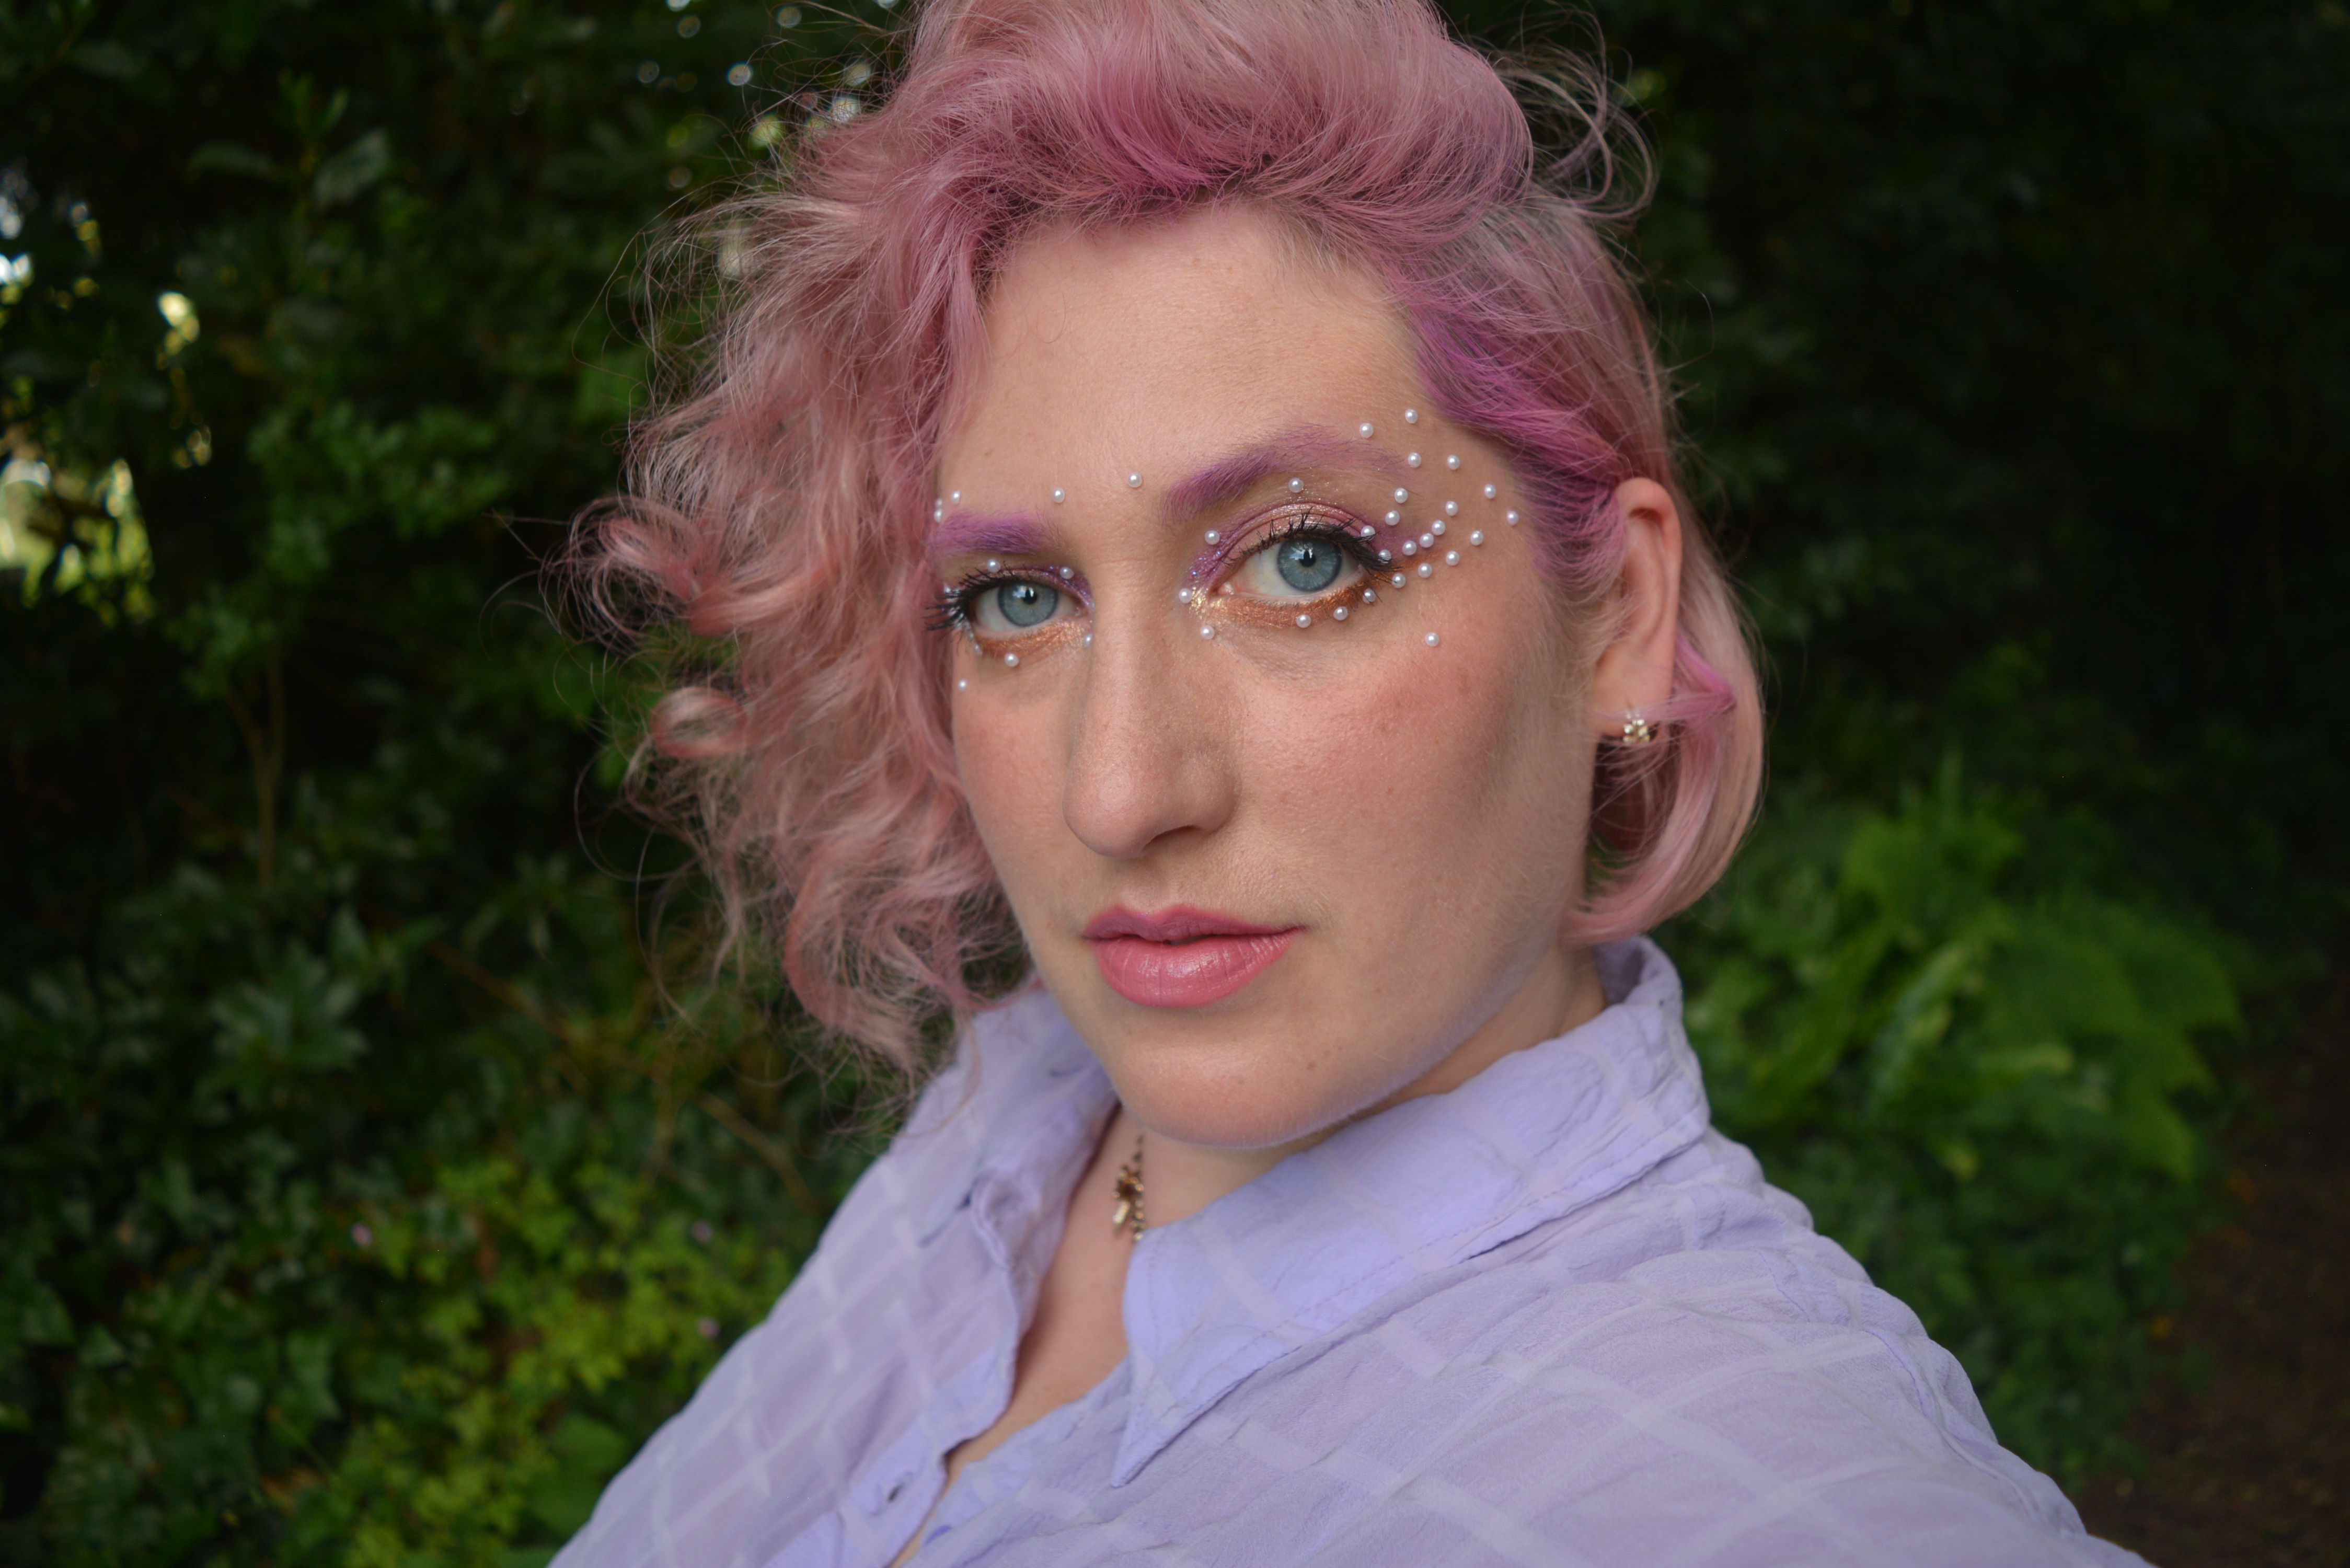 TeiFi against tree background, facing the camera, with decorative eye make up and pink hair